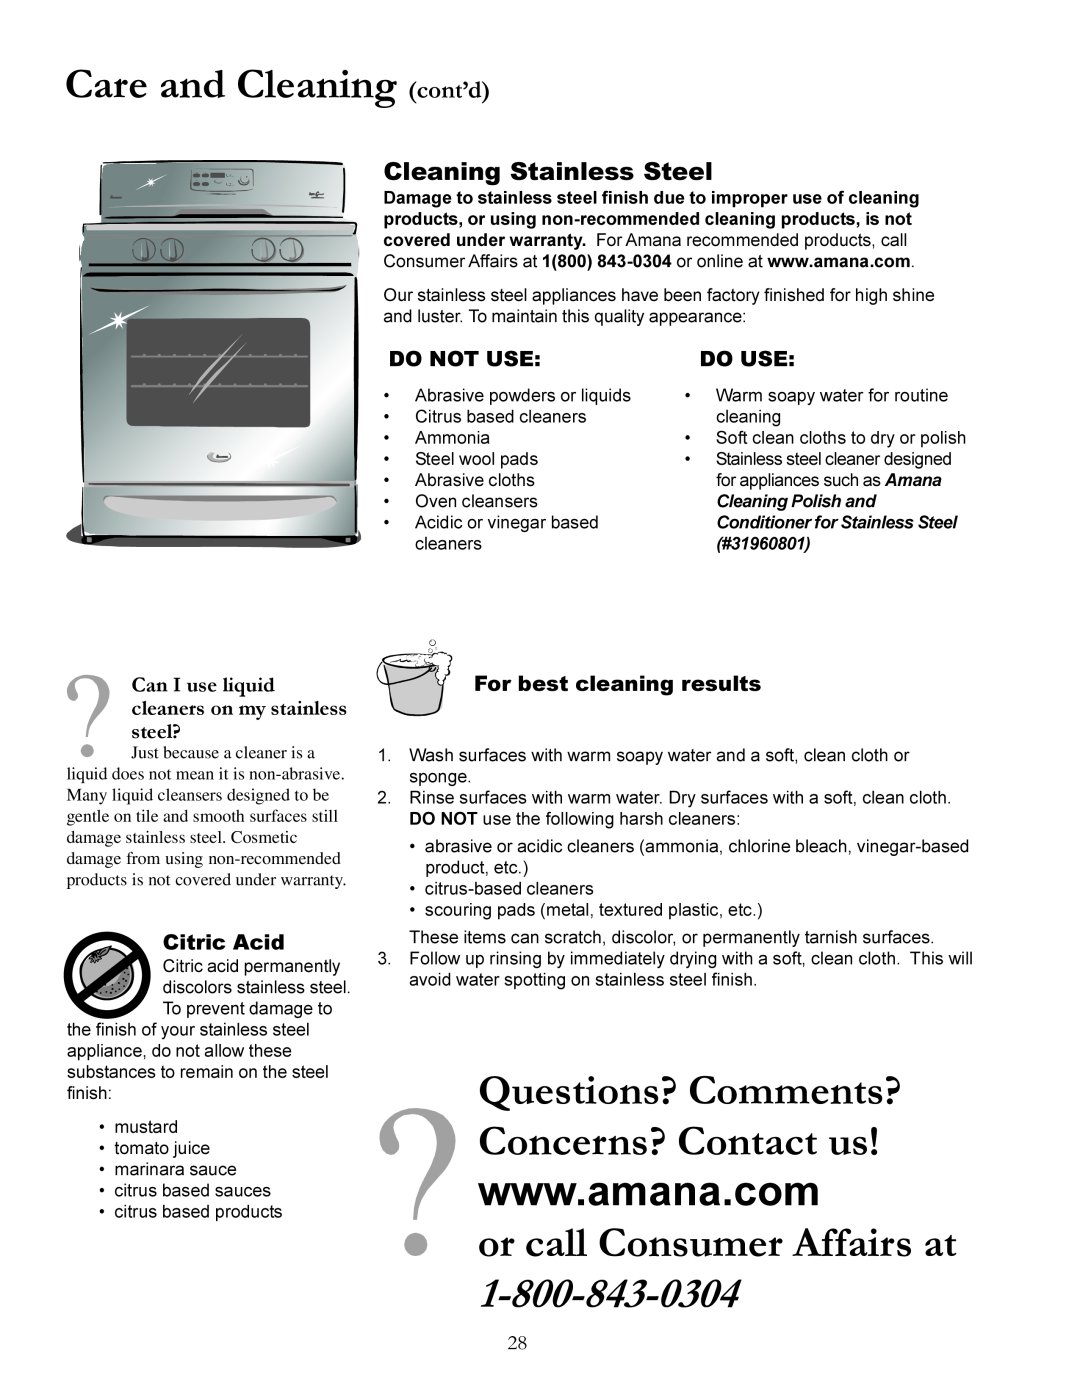 Amana The Big Oven Gas Range Care and Cleaning cont’d, or call Consumer Affairs at 1-800-843-0304, Do Not Use, Do Use 